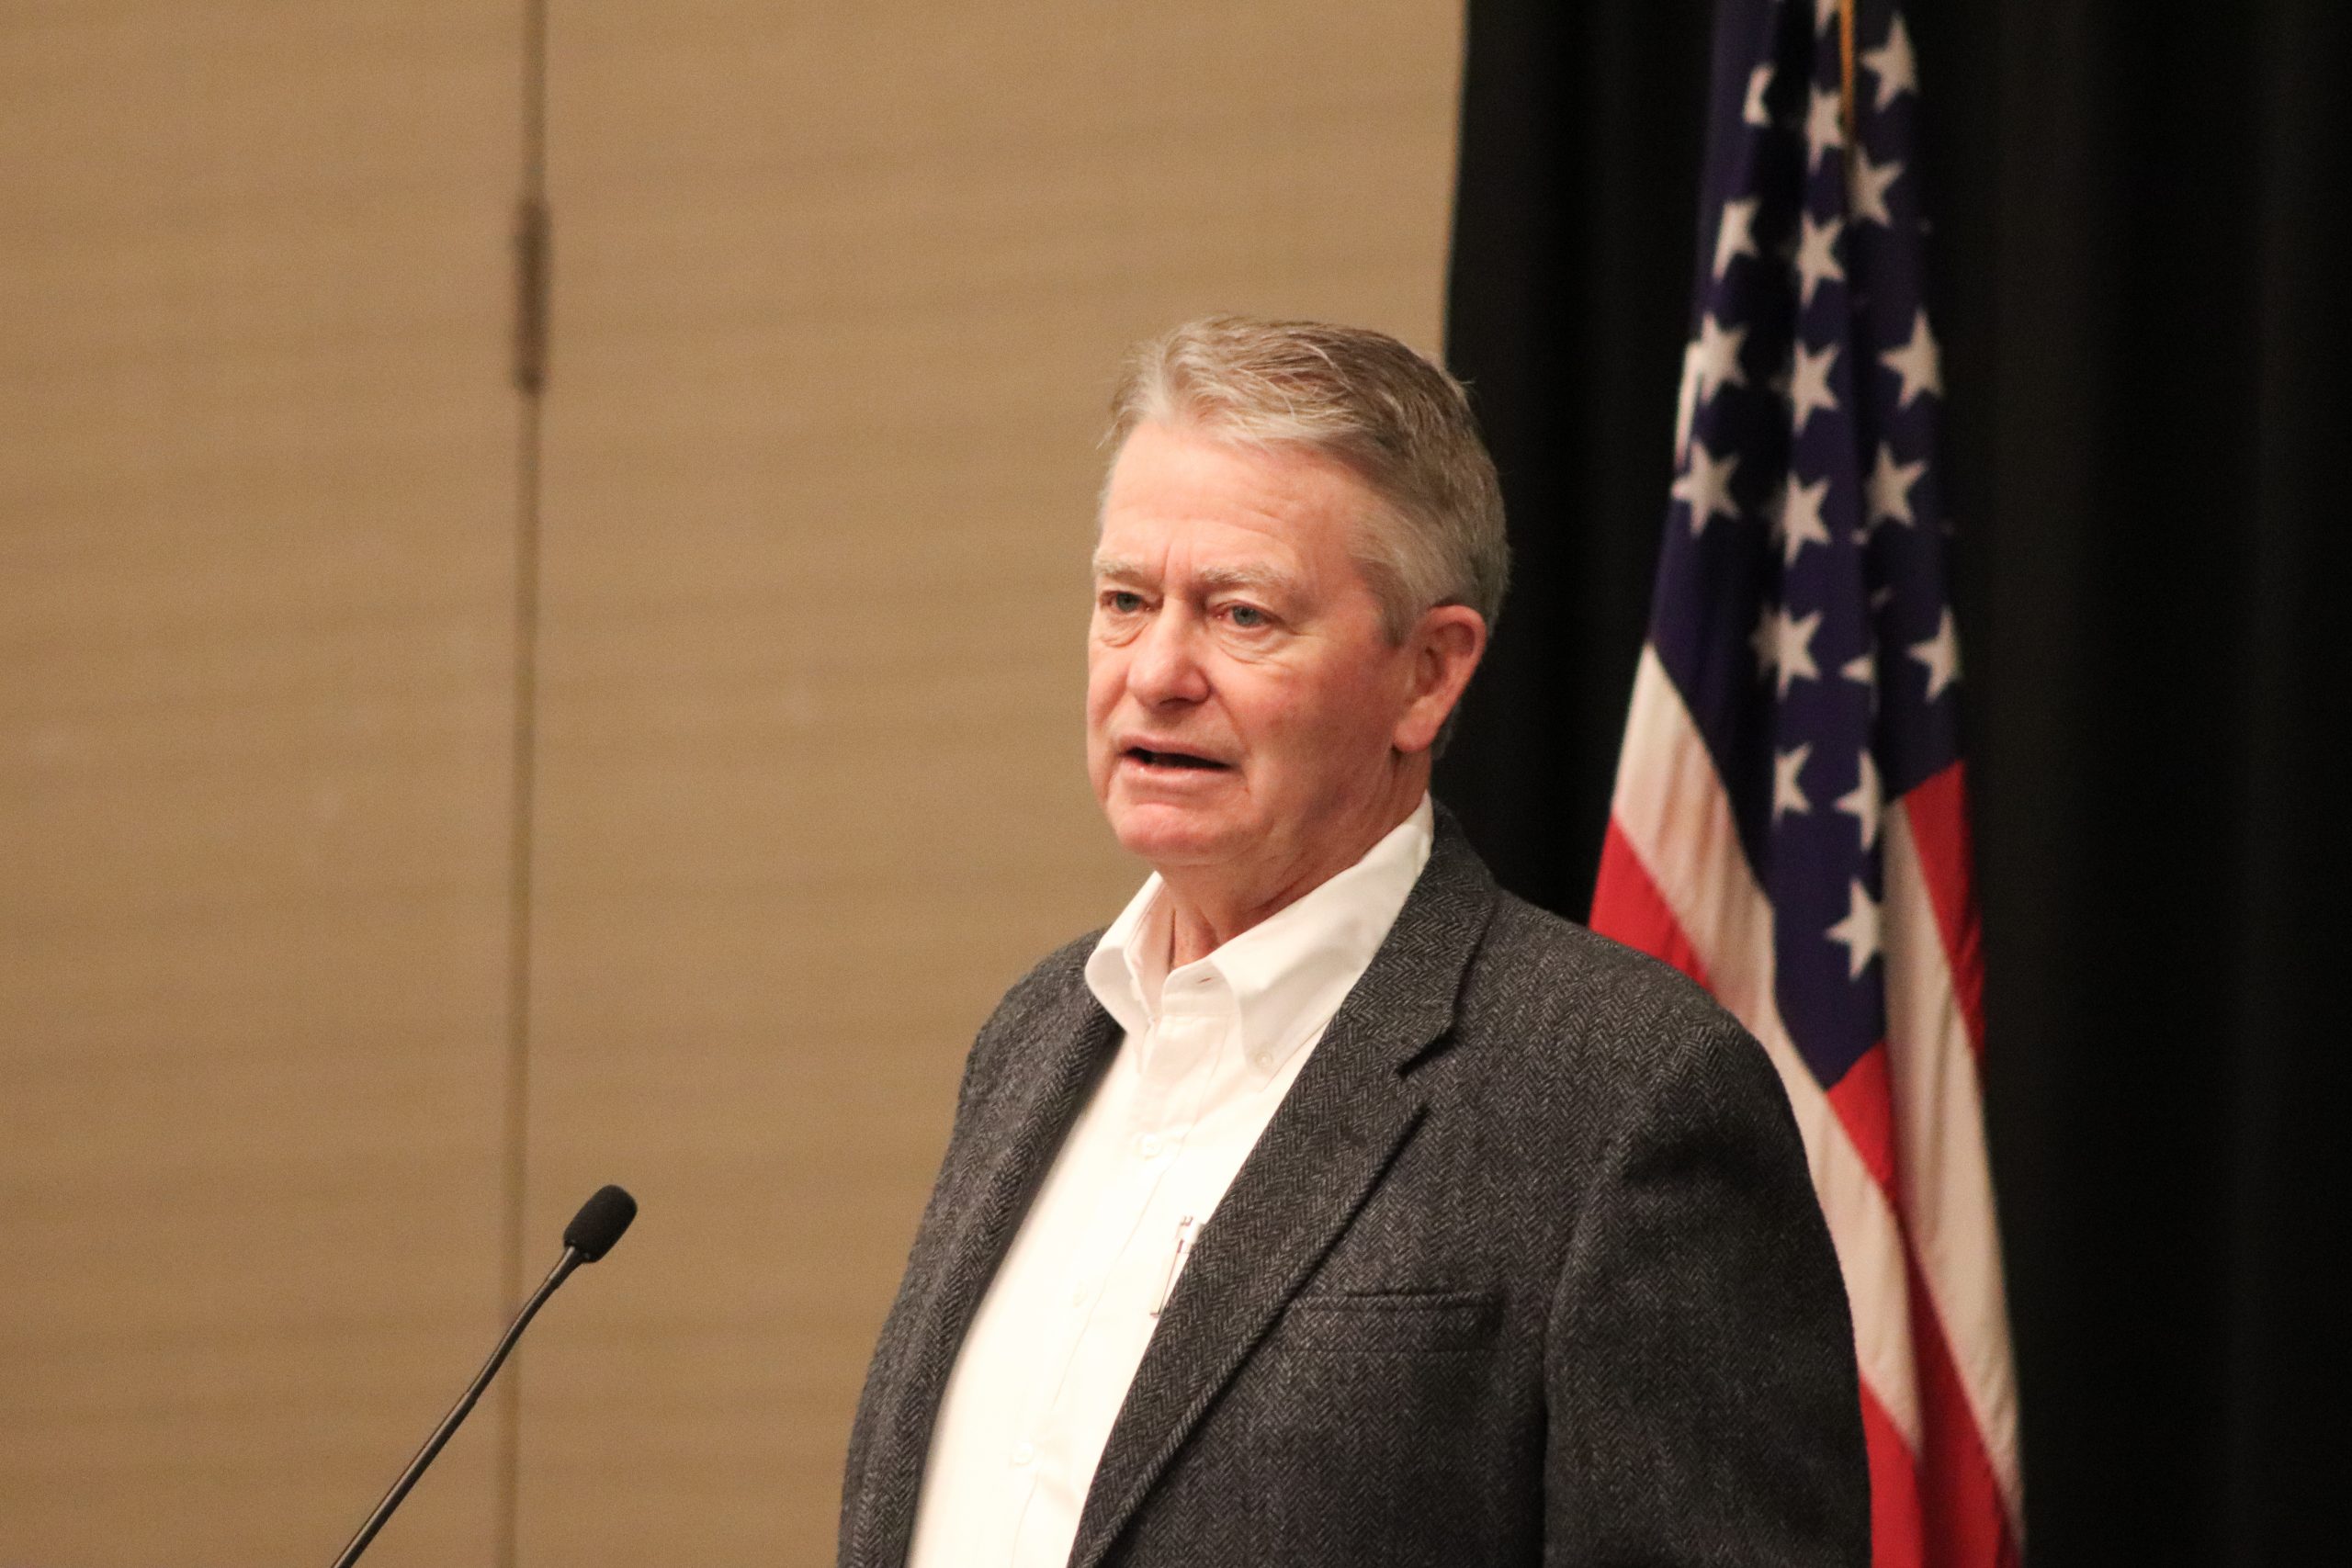 Gov. Little Proposes $120M in Property Tax Relief During State of the State